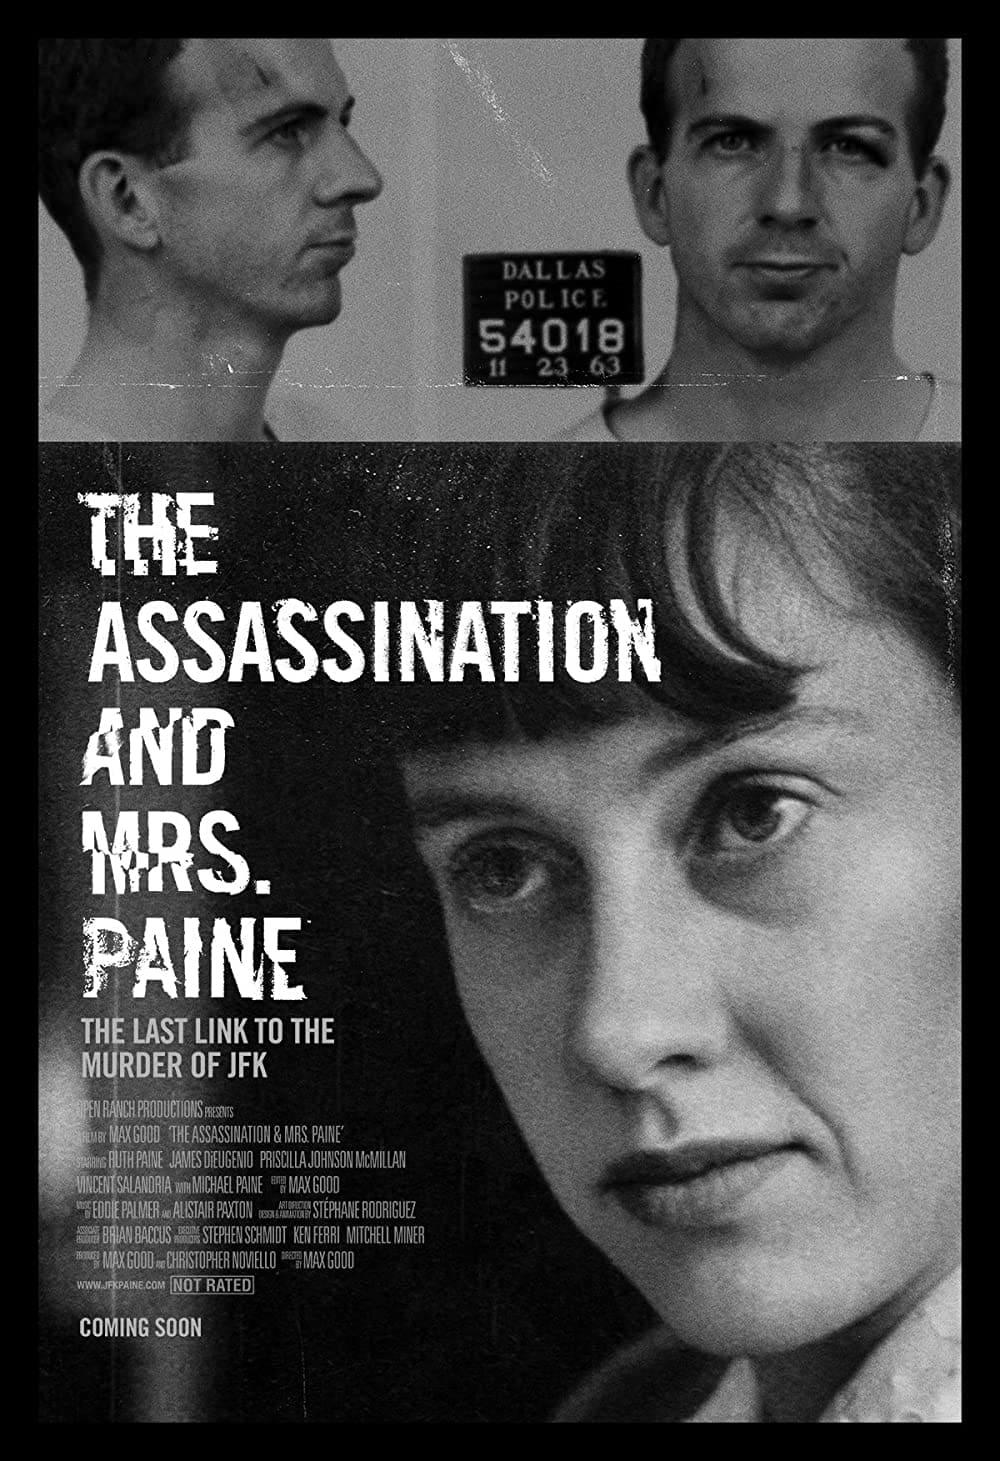 The Assassination & Mrs. Paine poster